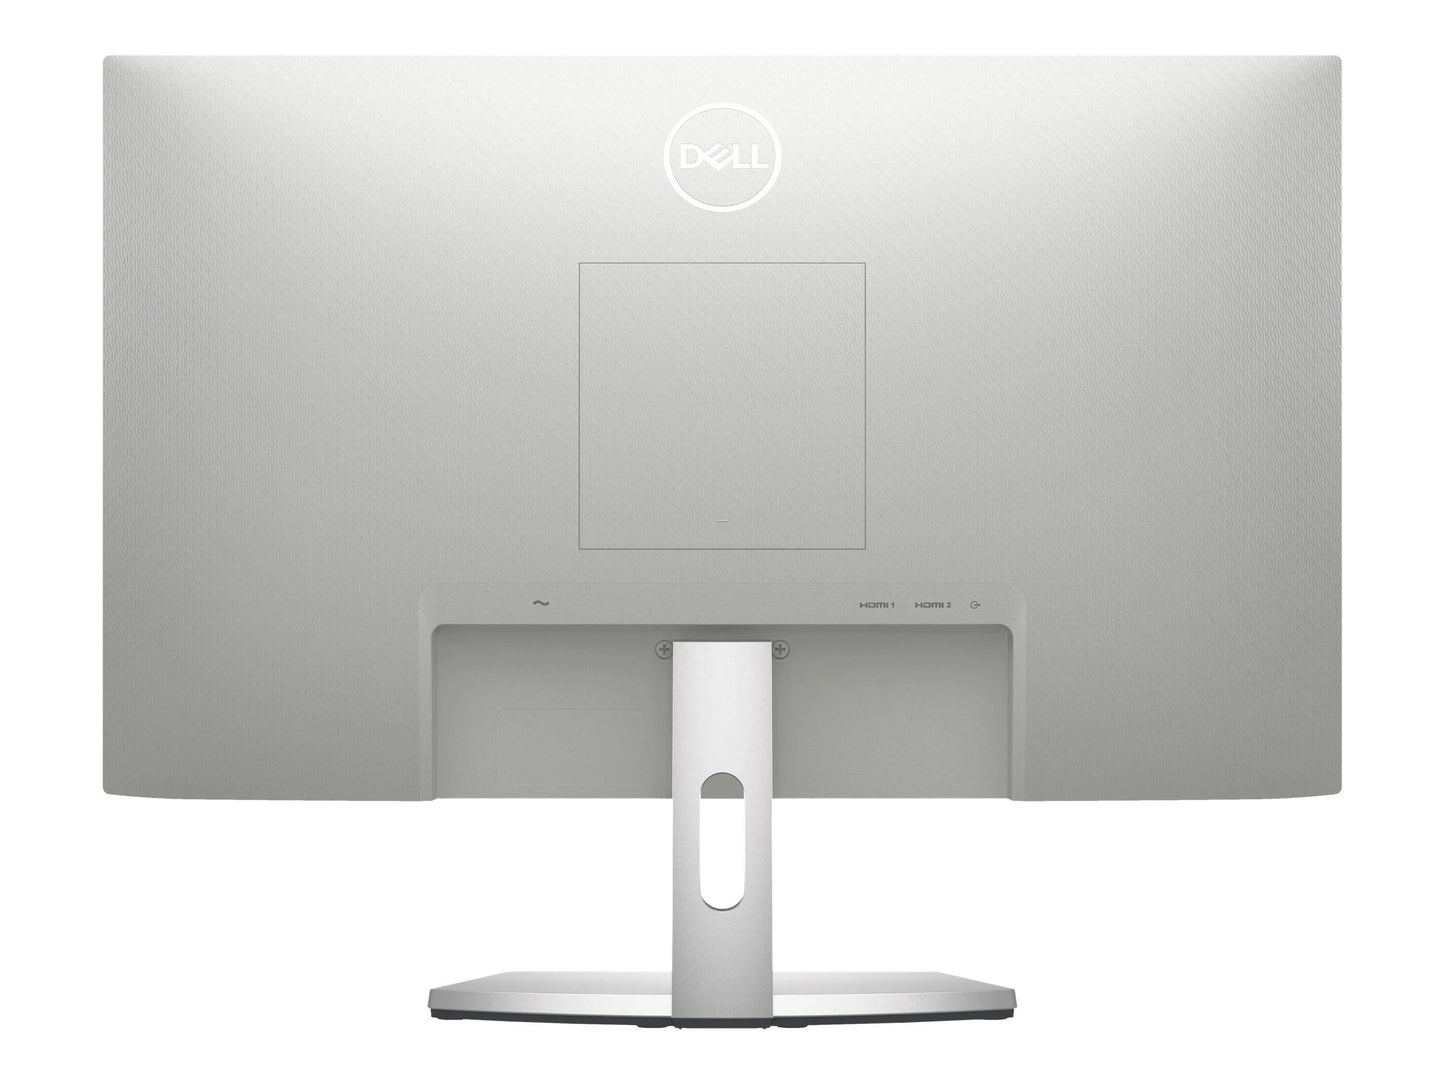 Dell 23.8" Full HD IPS Monitor with 2x HDMI - Energy Efficient